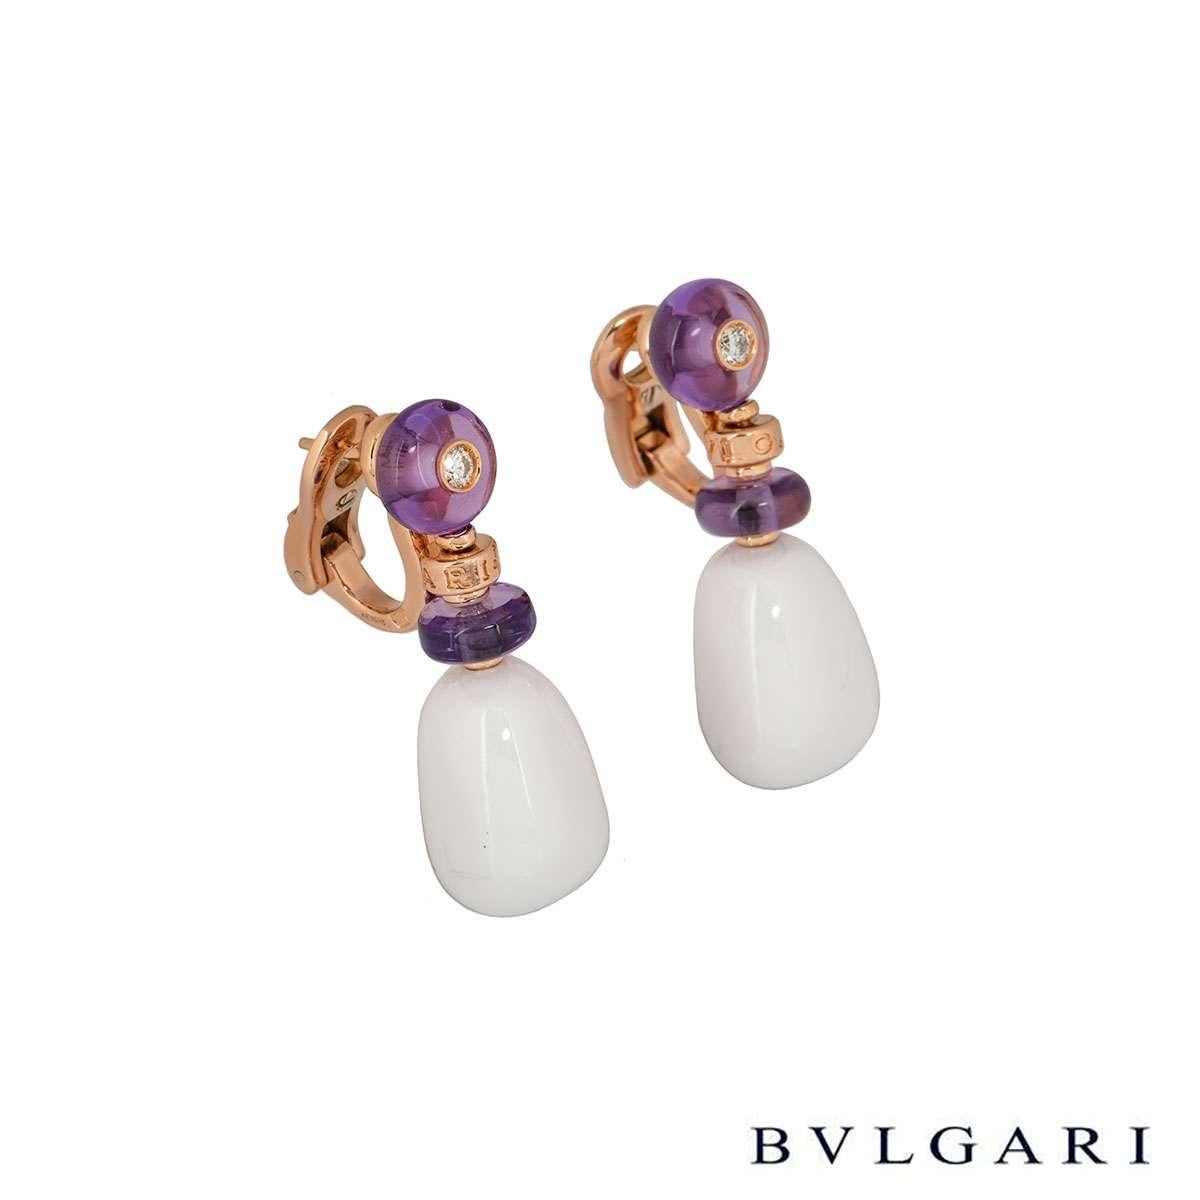 An 18k pair of 18k rose gold earrings by Bvlgari from the Mediterranean Eden collection. The earrings each comprise of 2 amethyst beads with a round brilliant cut diamonds in the centre of one and a white ceramic bead suspended beneath it. The